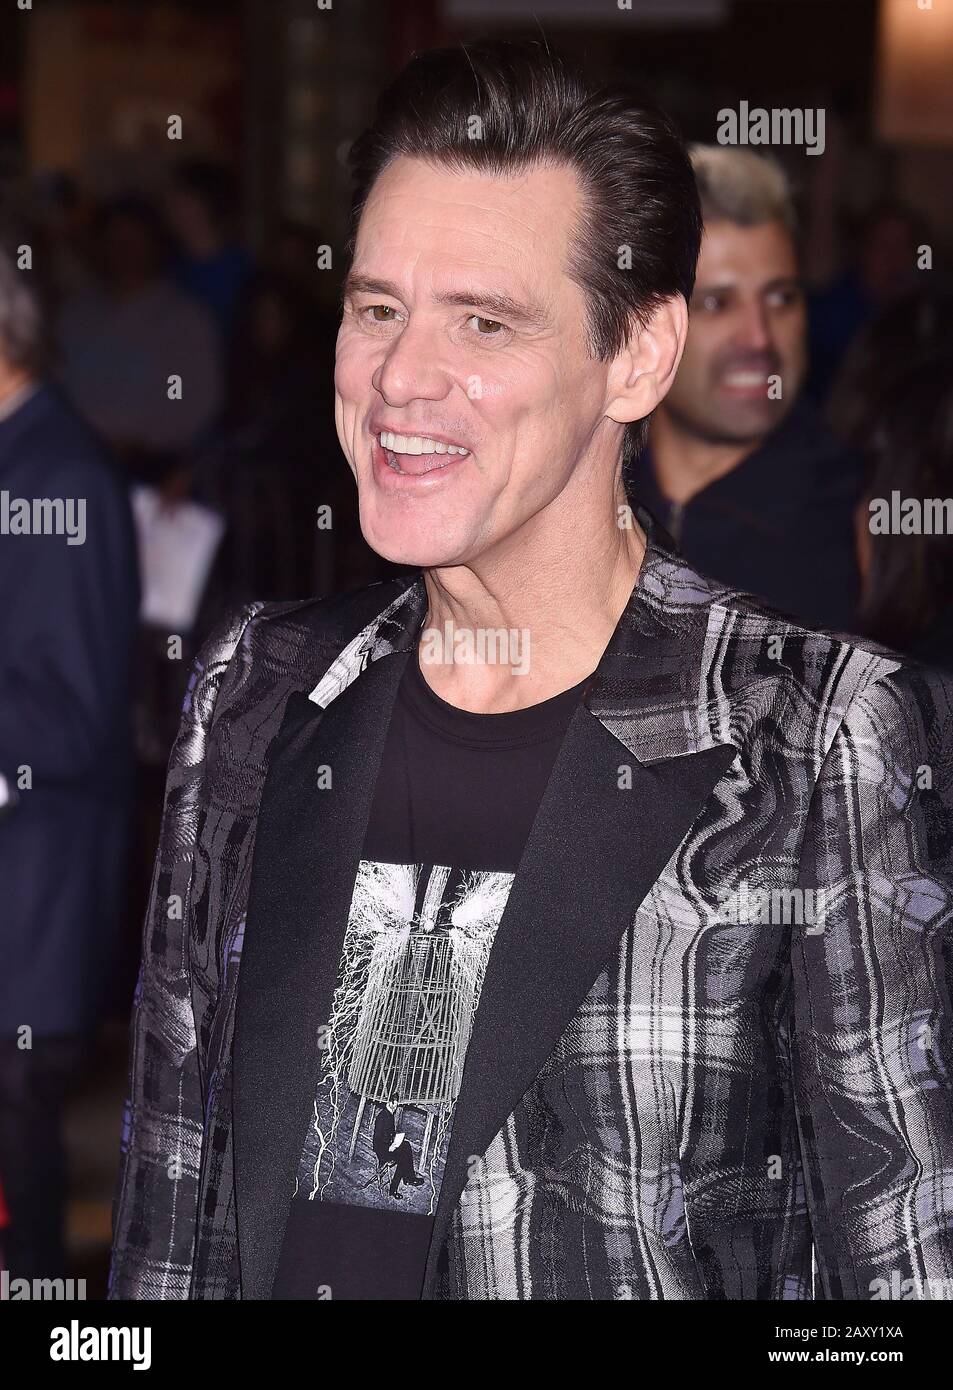 WESTWOOD, CA - FEBRUARY 12: Jim Carrey attends the LA special screening of Paramount's 'Sonic The Hedgehog' at Regency Village Theatre on February 12, 2020 in Westwood, California. Stock Photo